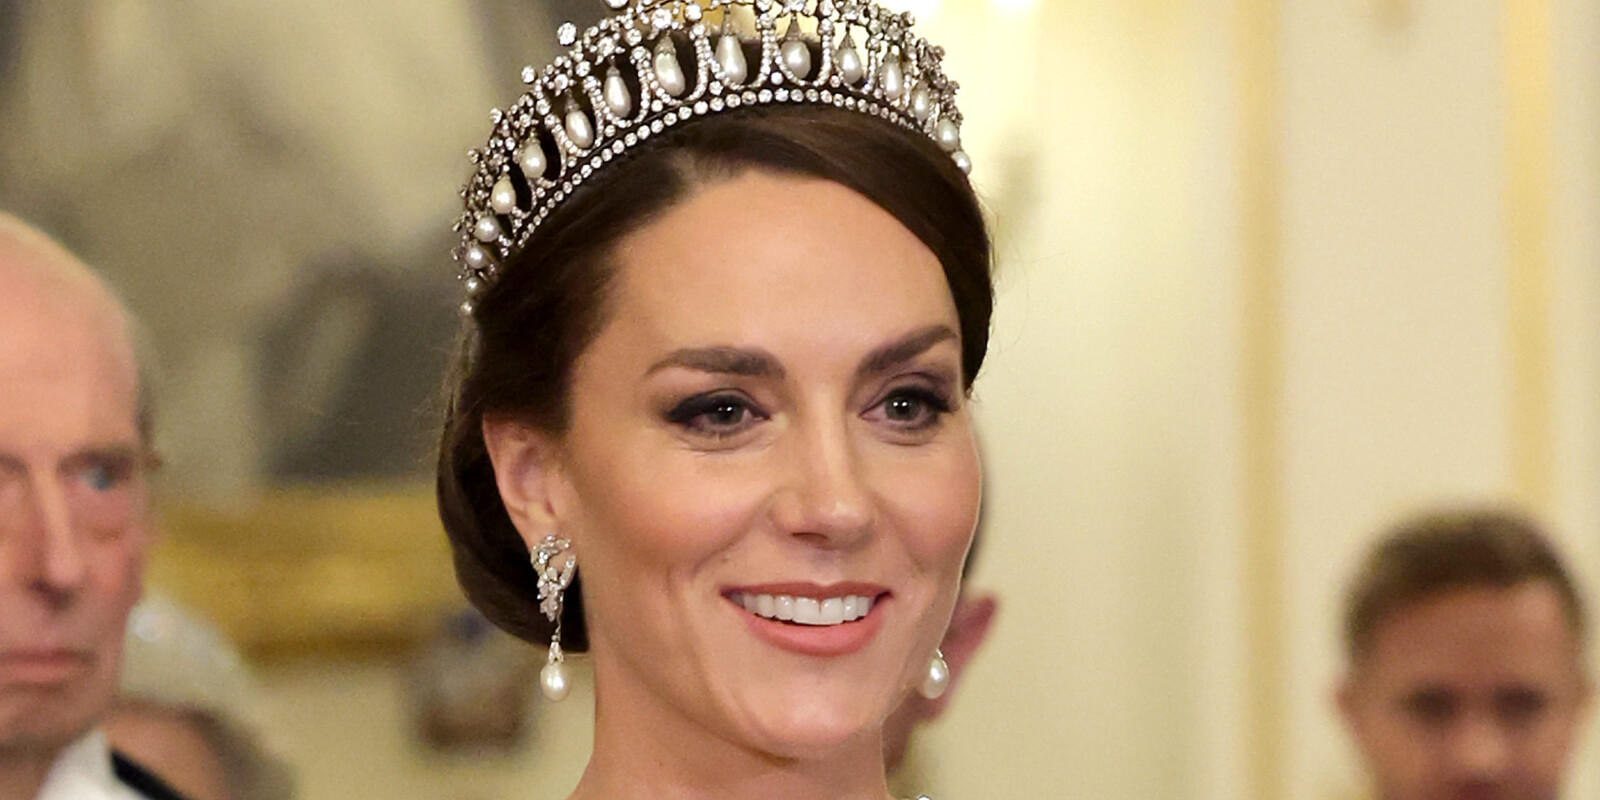 Kate Middleton, the Princess of Wales, wears a tiara to a formal royal event in 2022.